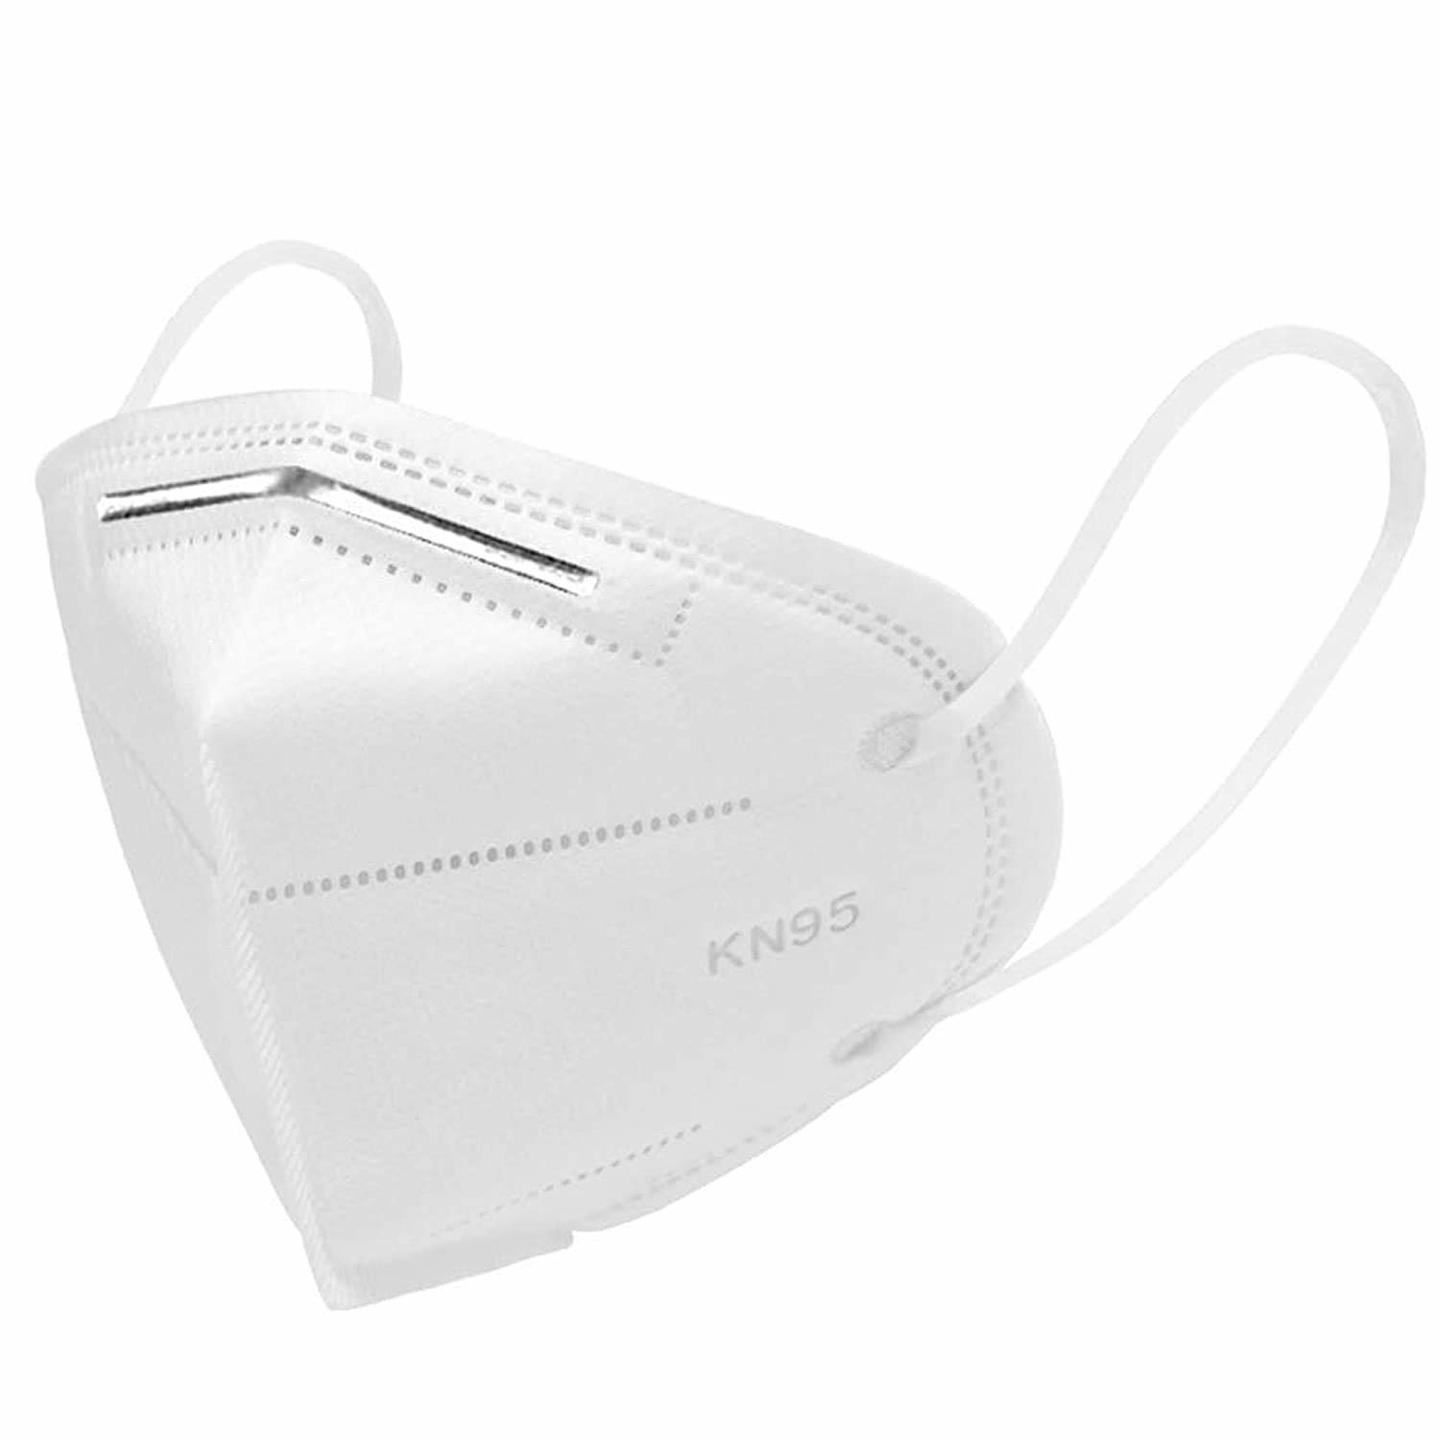 KN95 5 layer filter mask